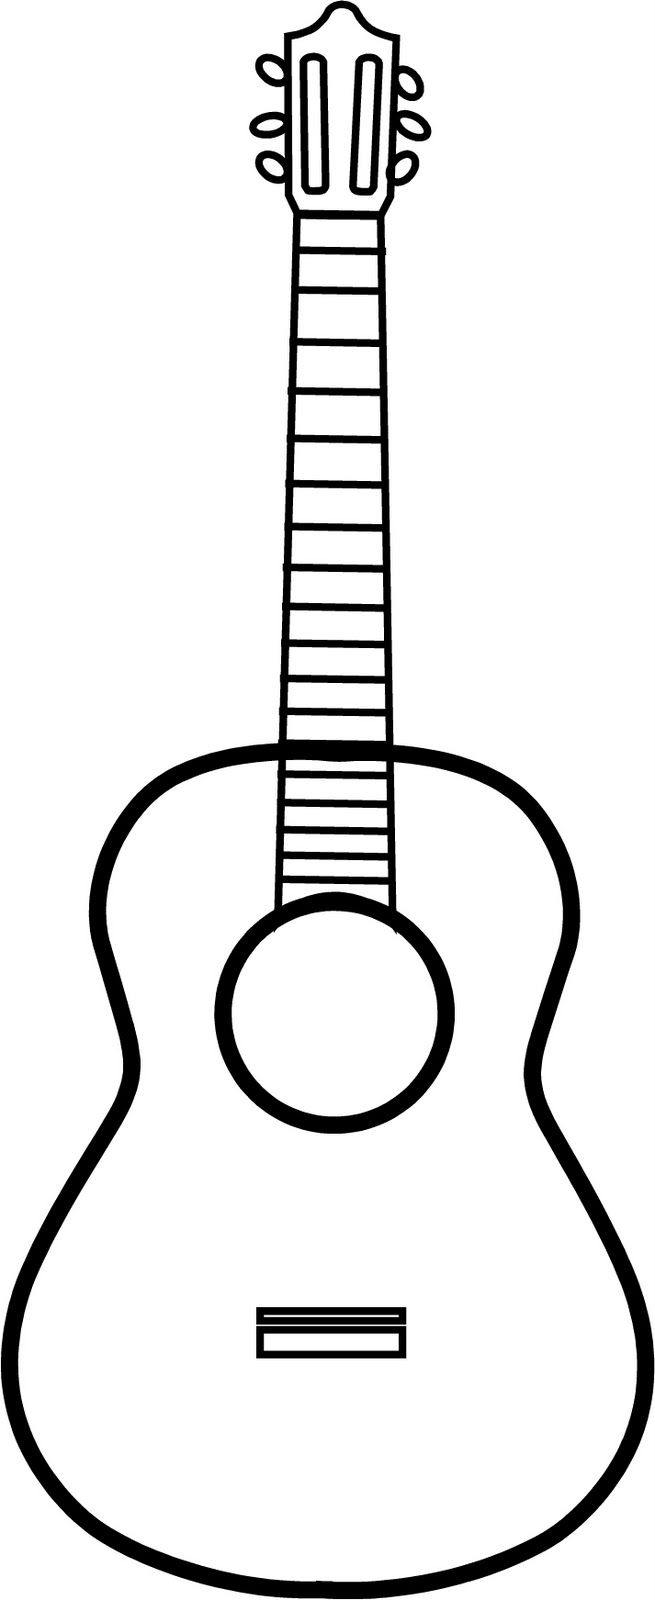 Outline vinyl on the. Clipart guitar simple